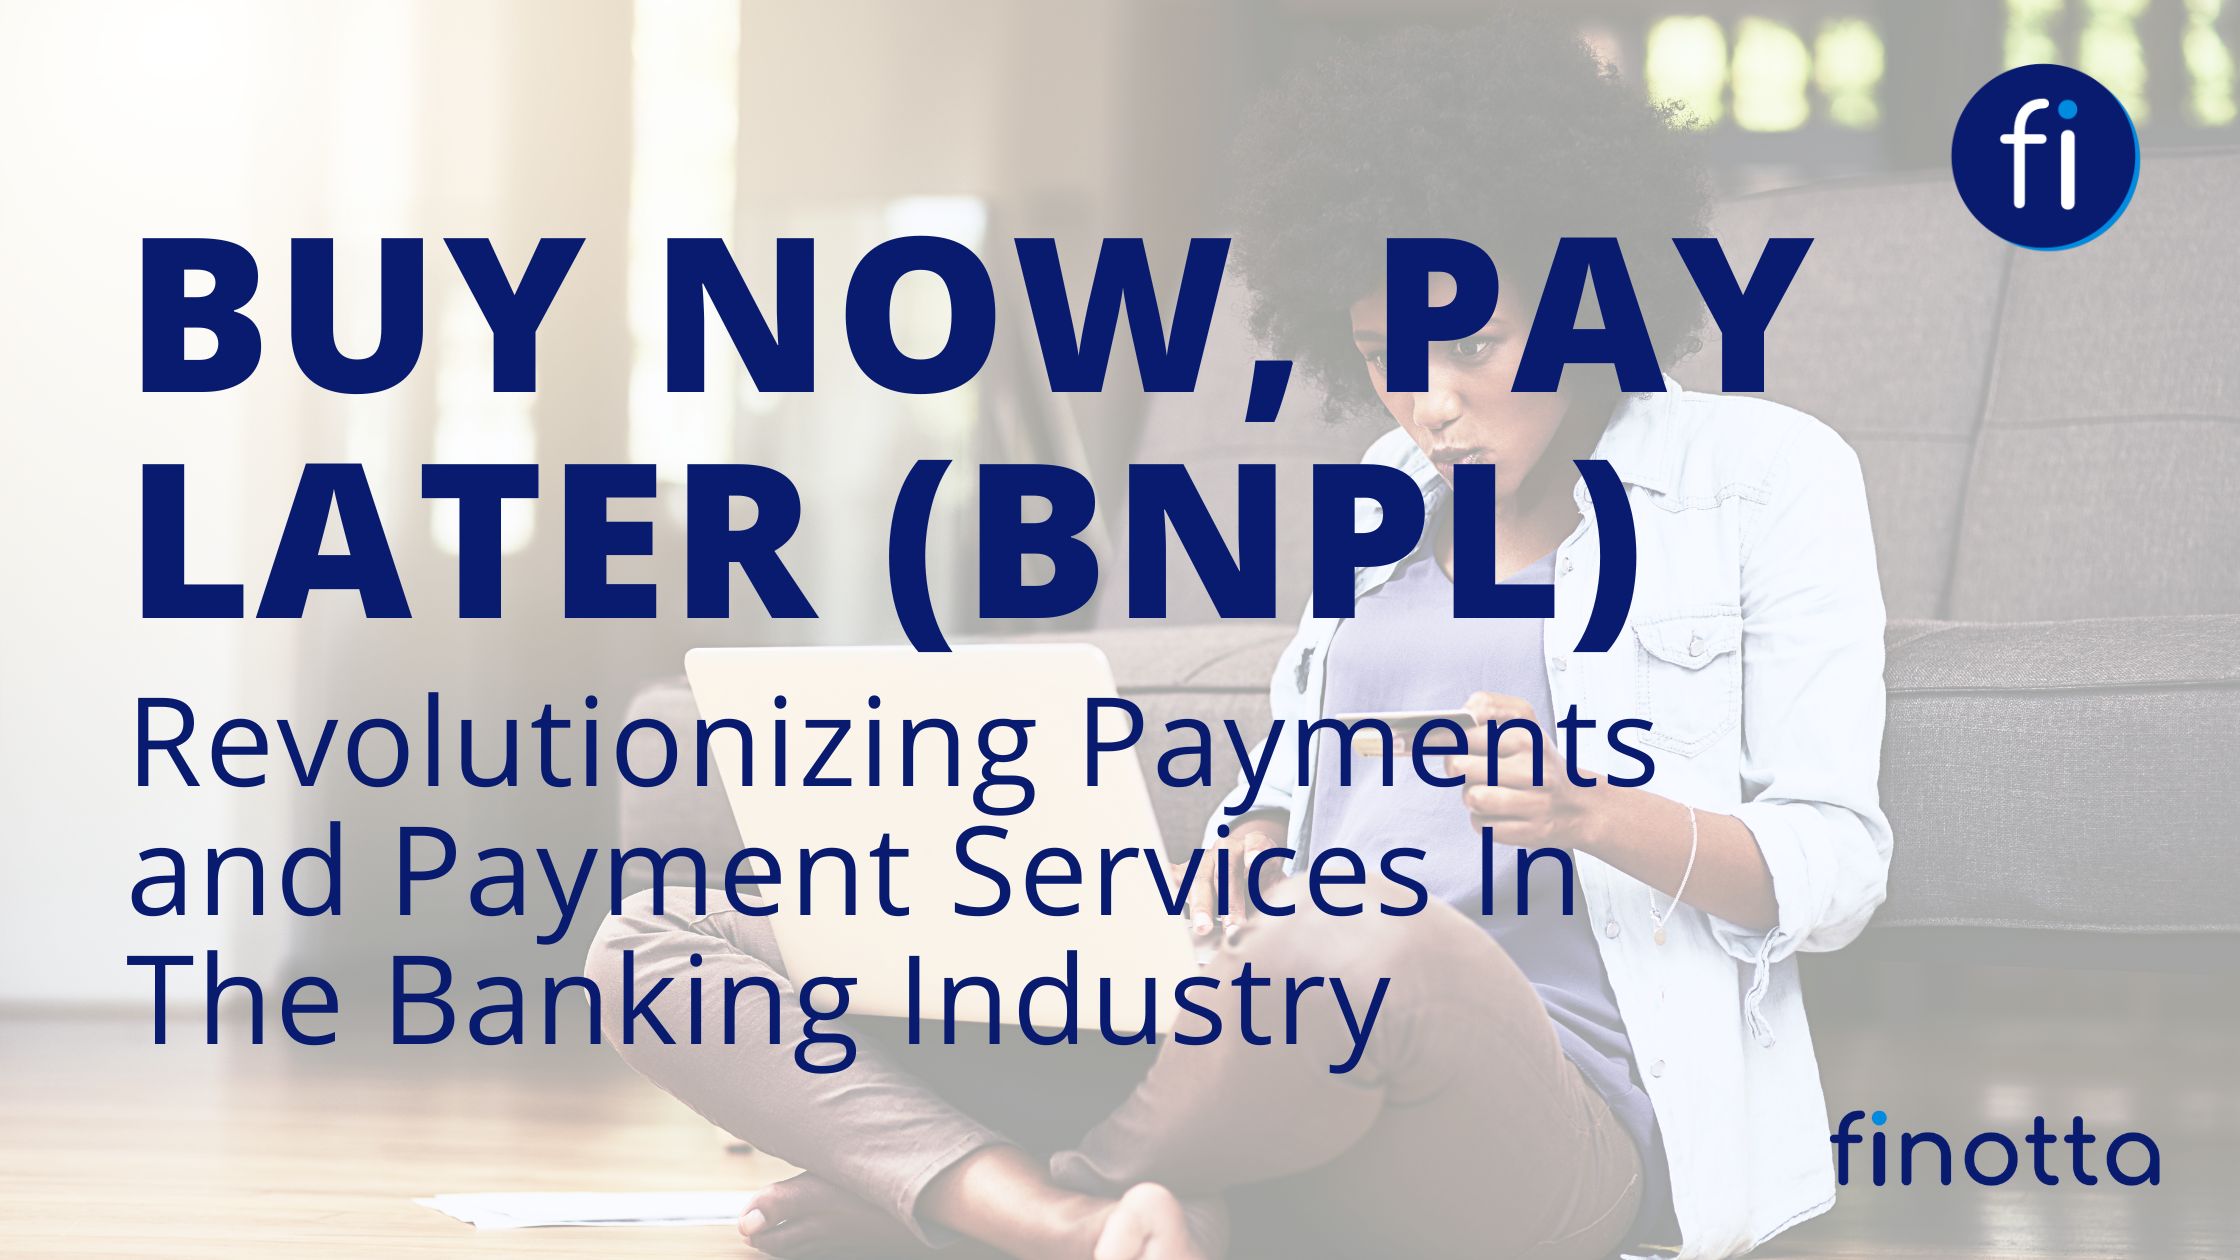 Buy Now, Pay Later (BNPL): Revolutionizing Payments and Payment Services